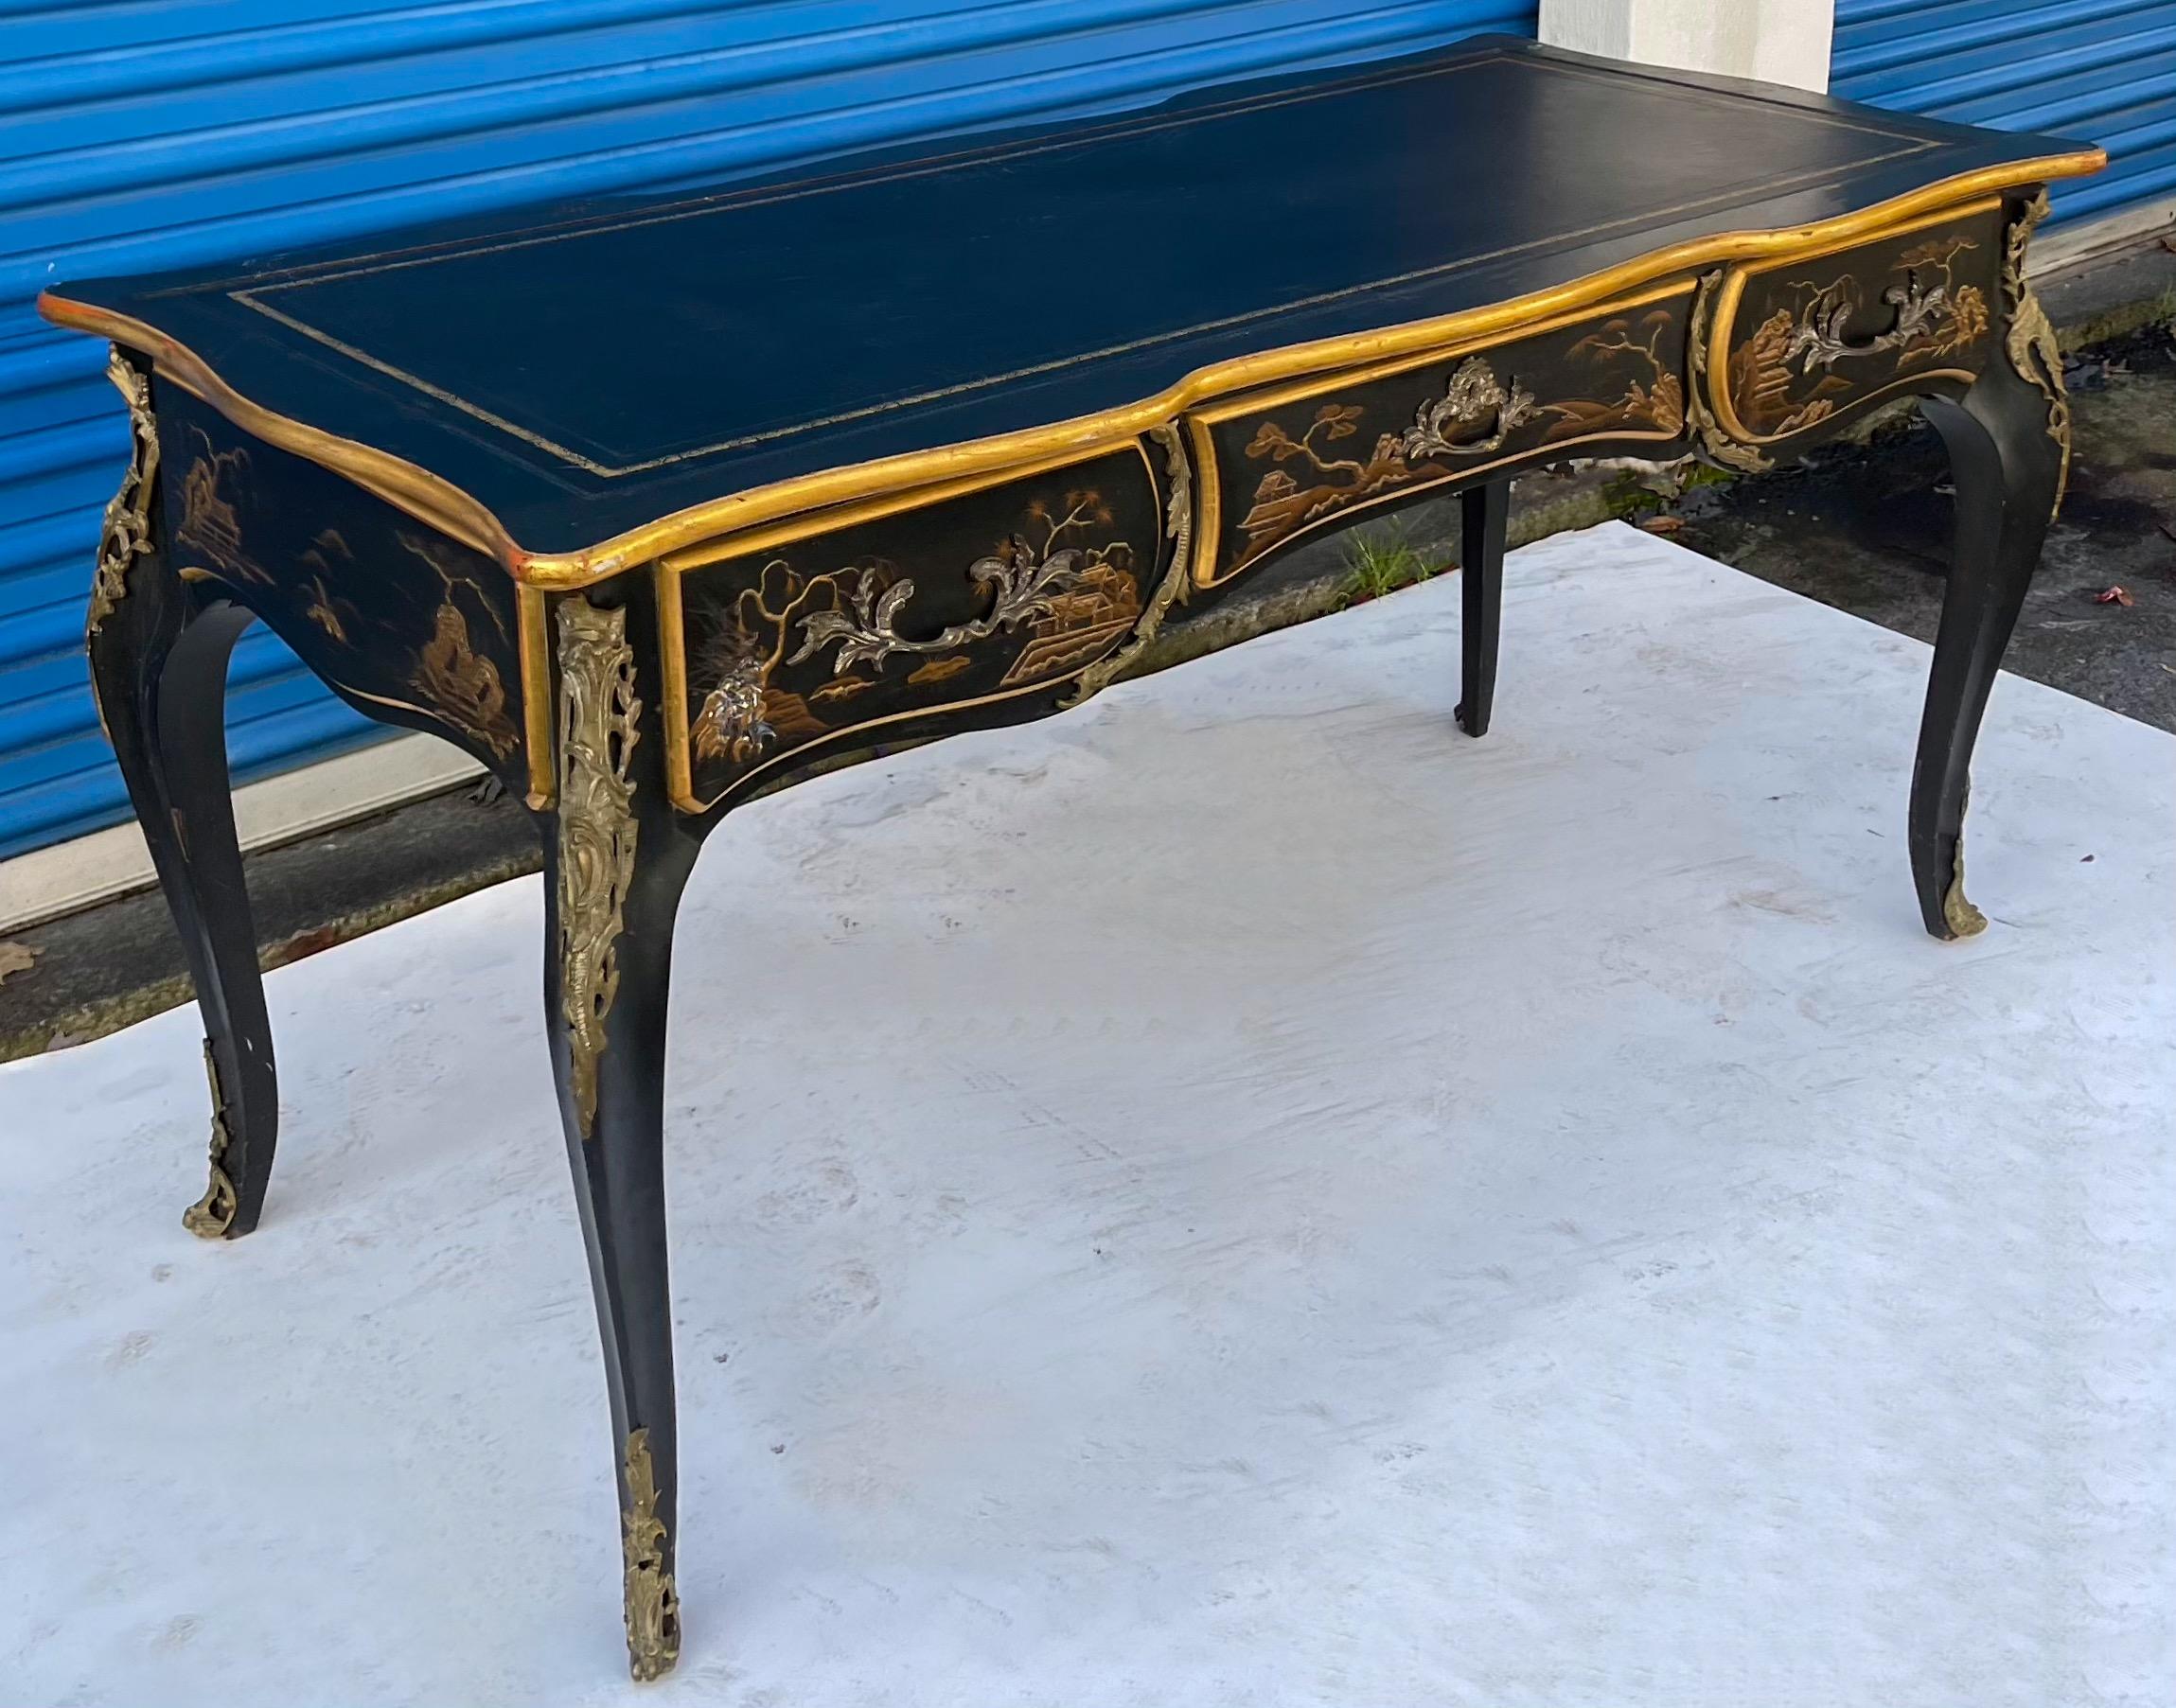 This is a wonderful piece! It is a French Louis XV style chinoiserie and gilt bronze bureau plat with black leather top. It has partner’s styling, but the drawers are functional on only one side. It is exceptional in it’s detail. It is in very nice